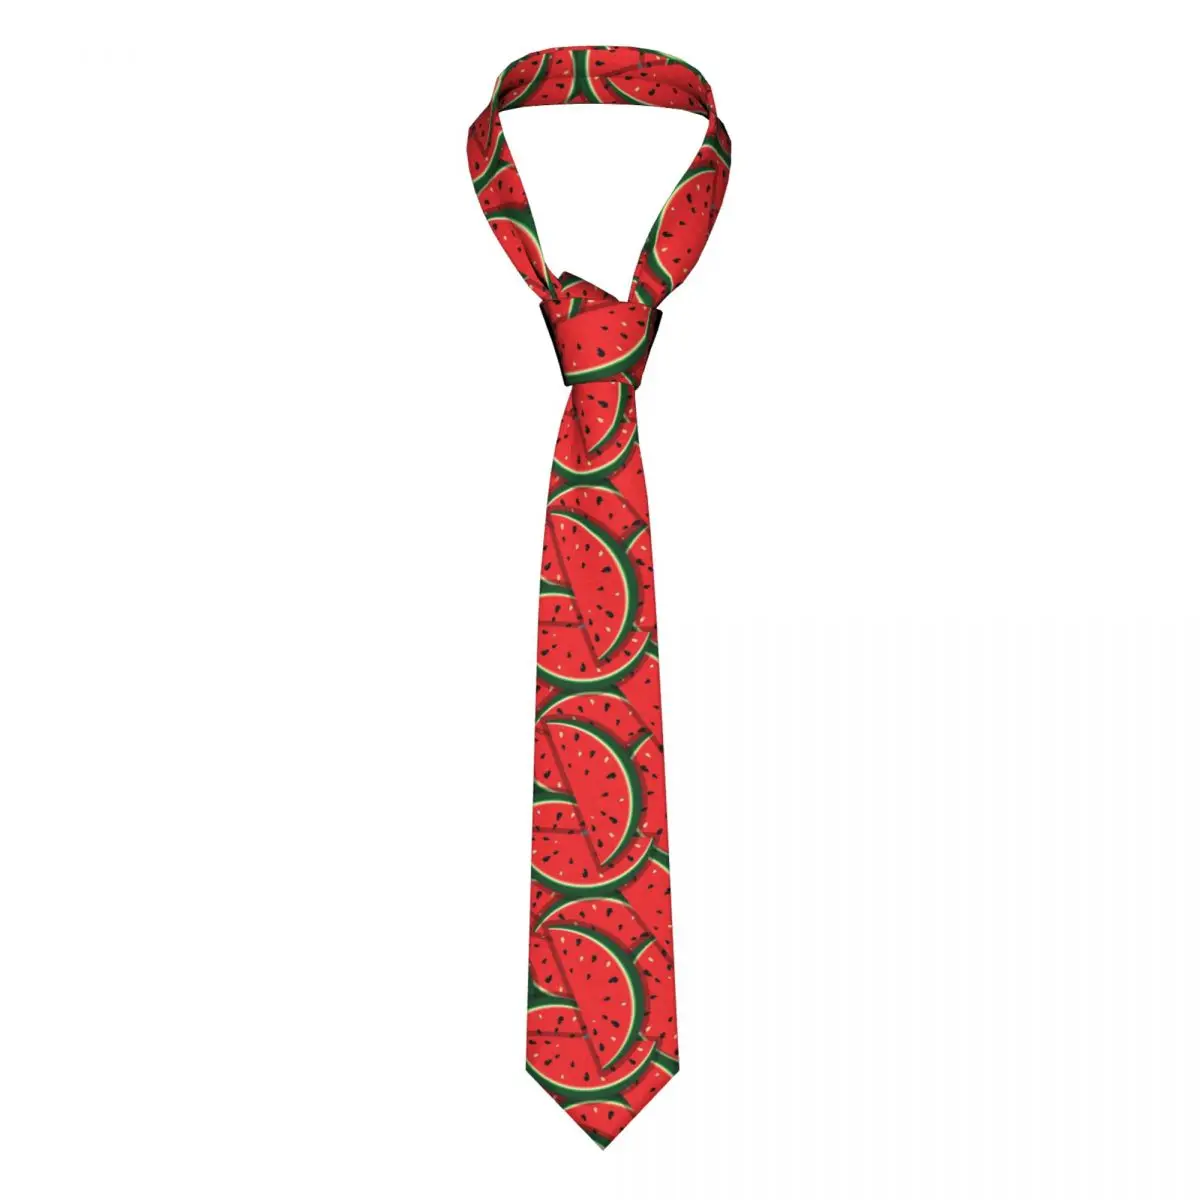 

Mens Tie Classic Skinny Fresh Slices Of Red Watermelon Neckties Narrow Collar Slim Casual Tie Accessories Gift